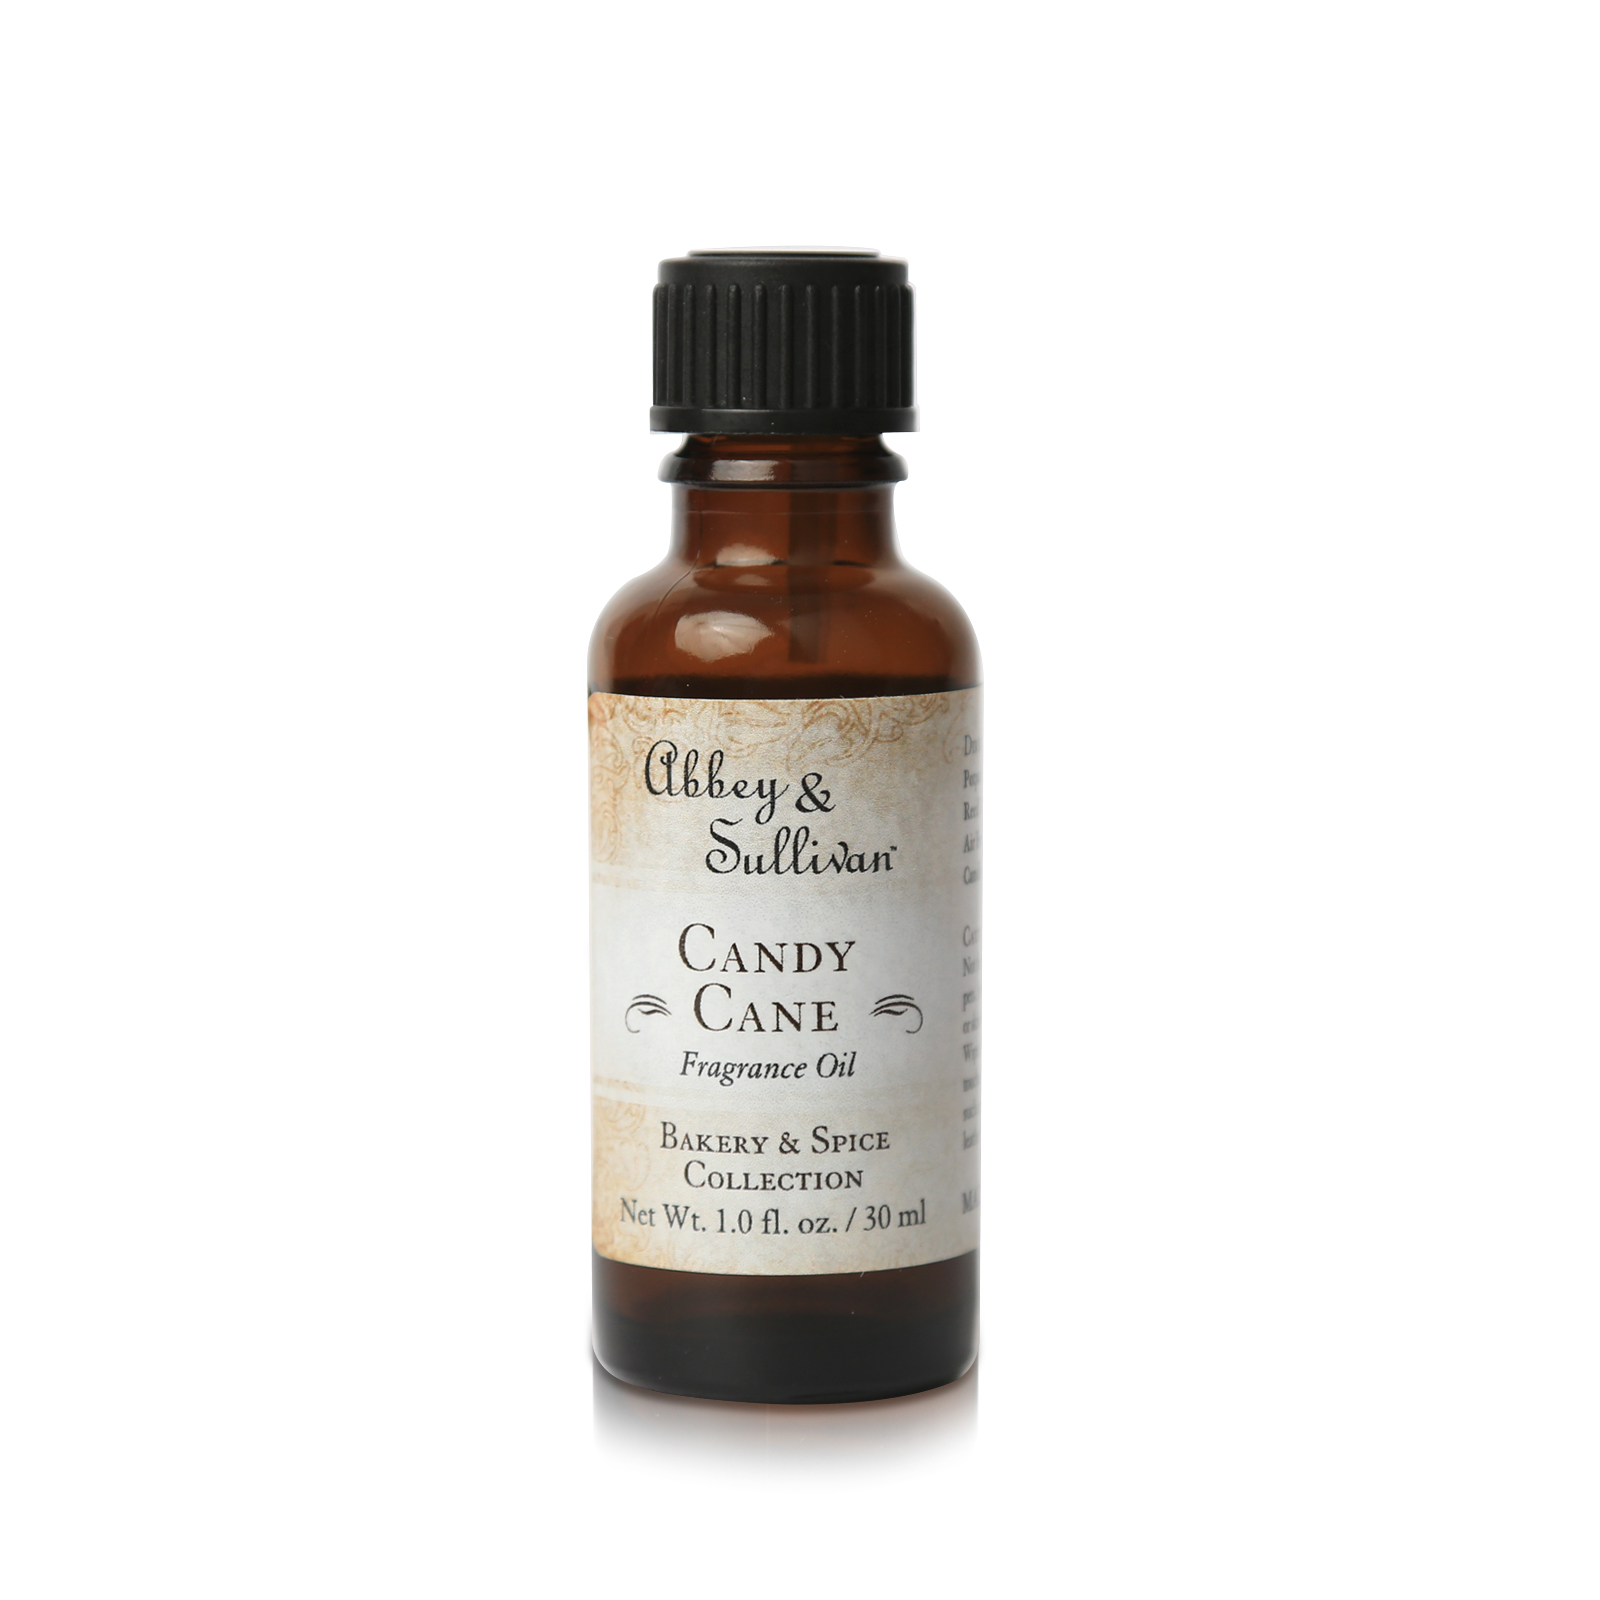 Fragrance Oil, Candy Cane